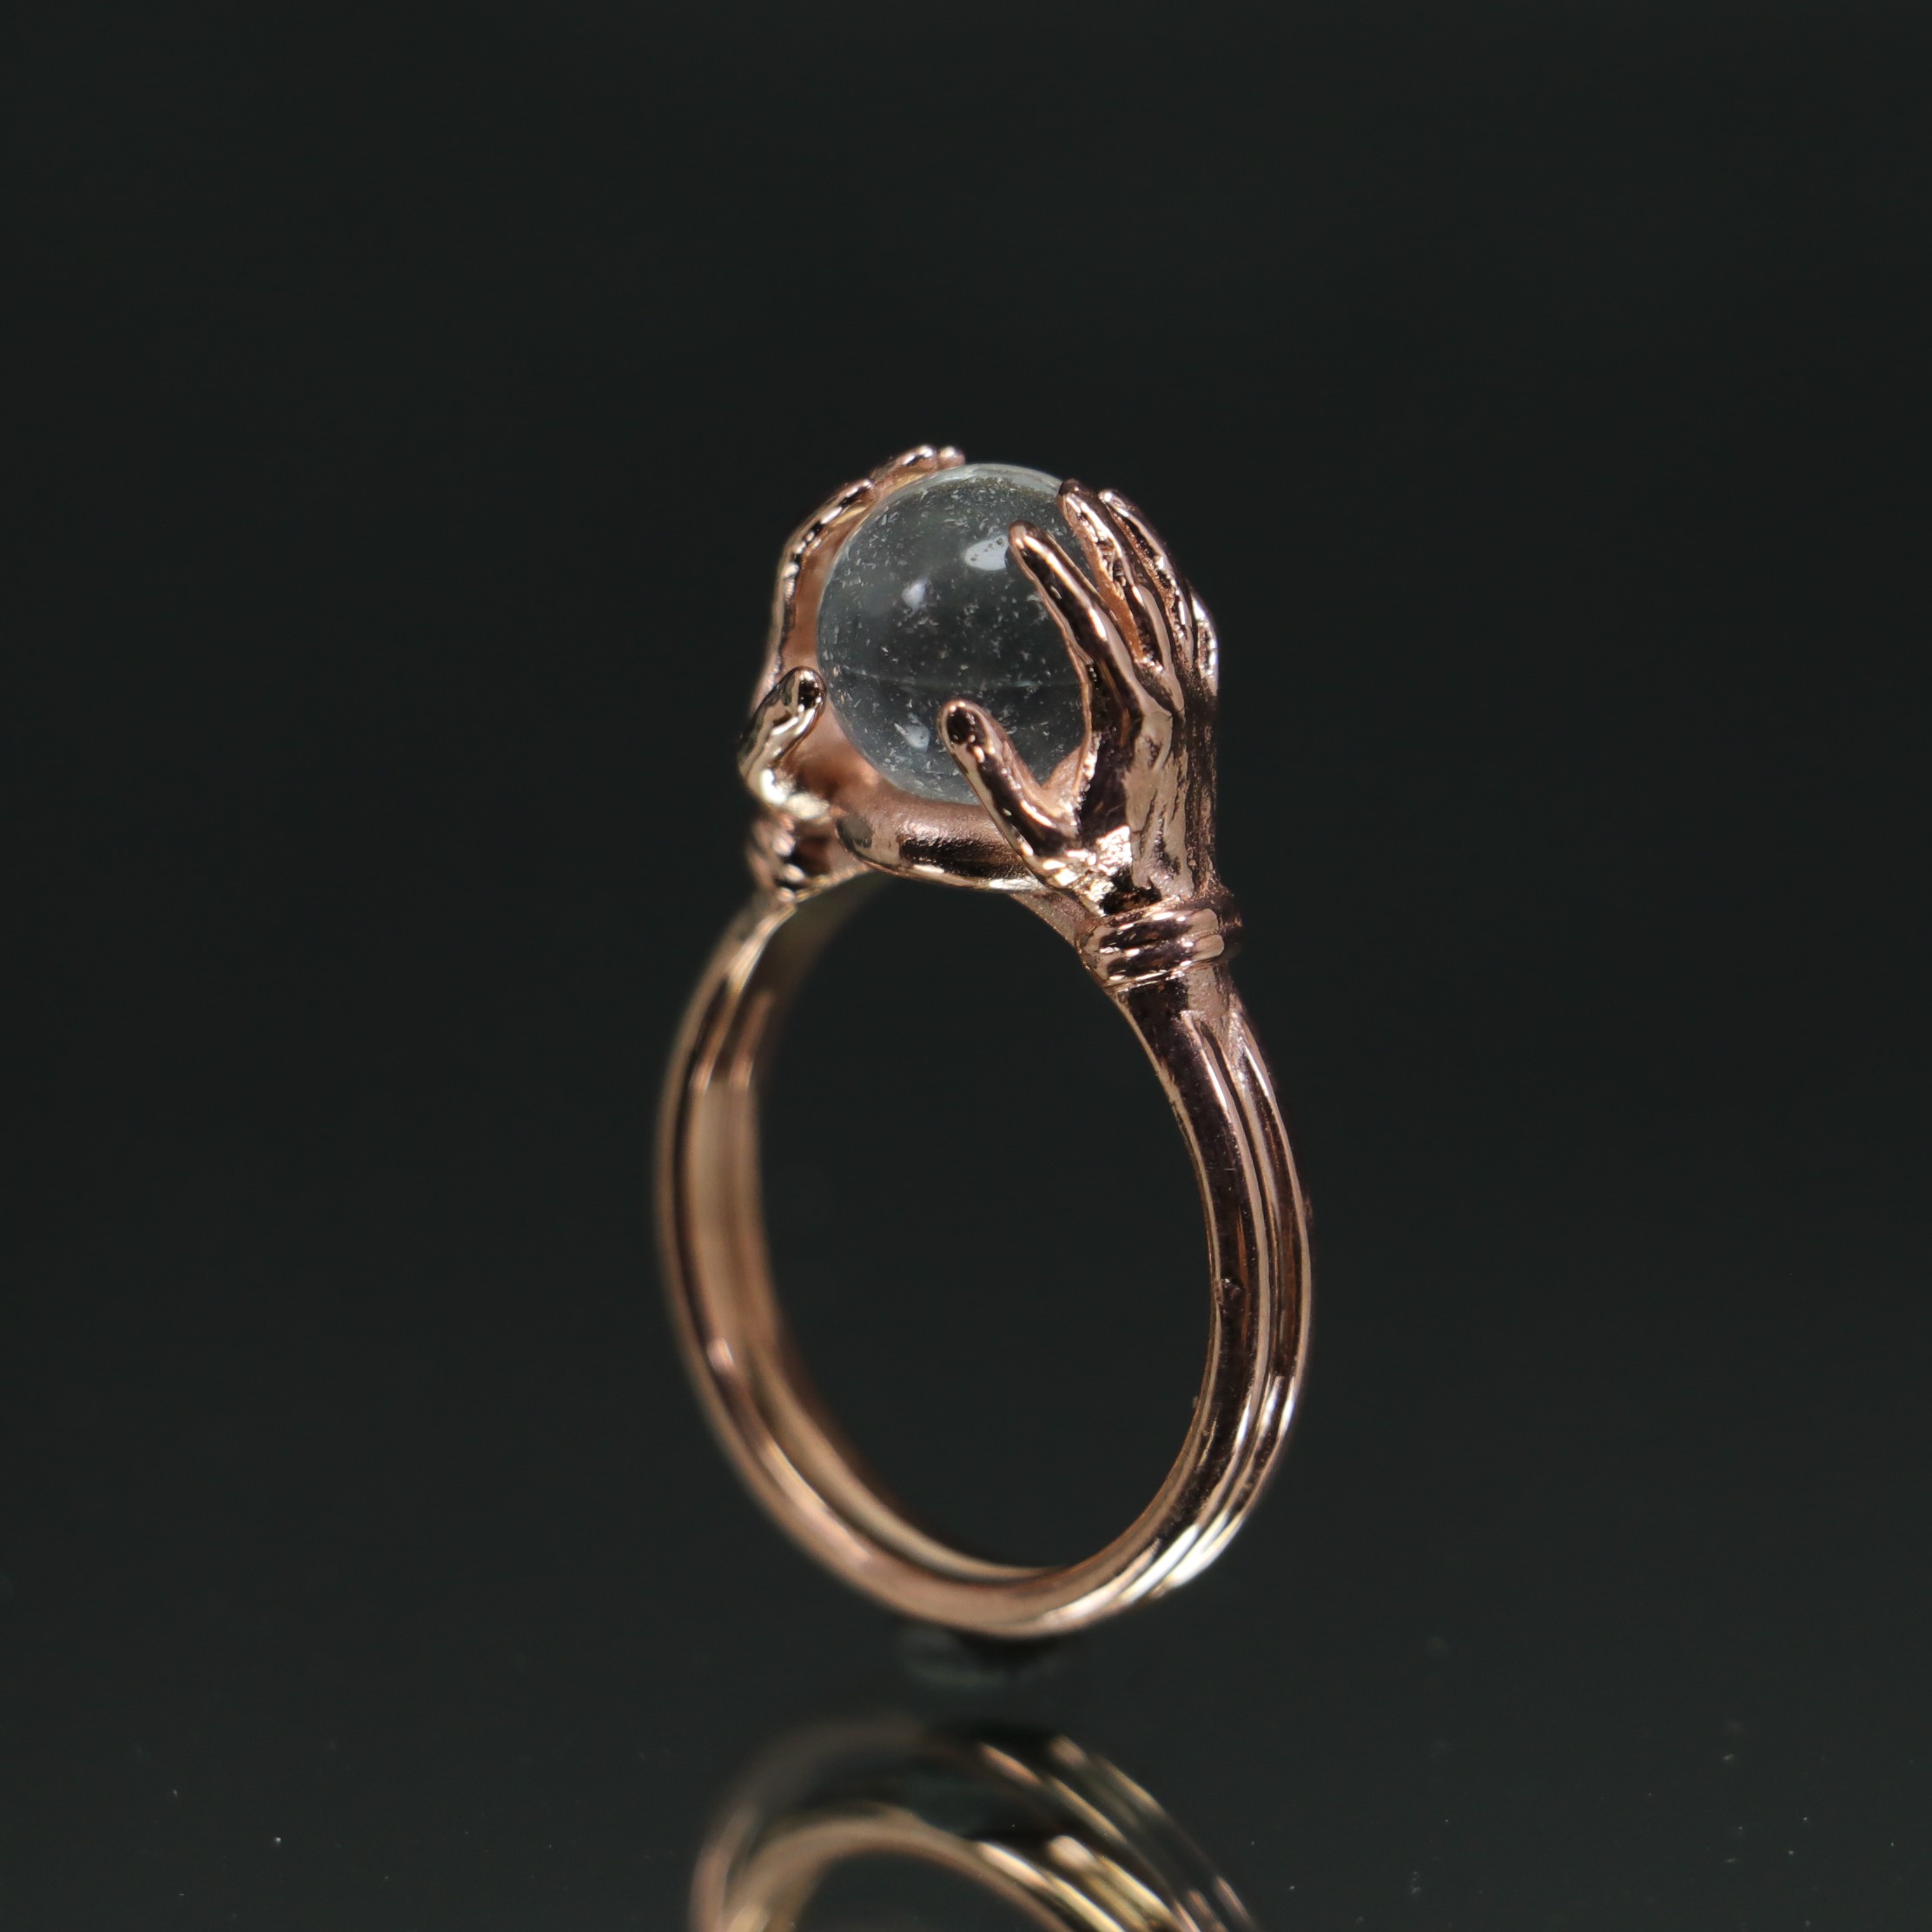 Clear Quartz 925 Sterling Silver Rose Gold Plated Ring Between Hands